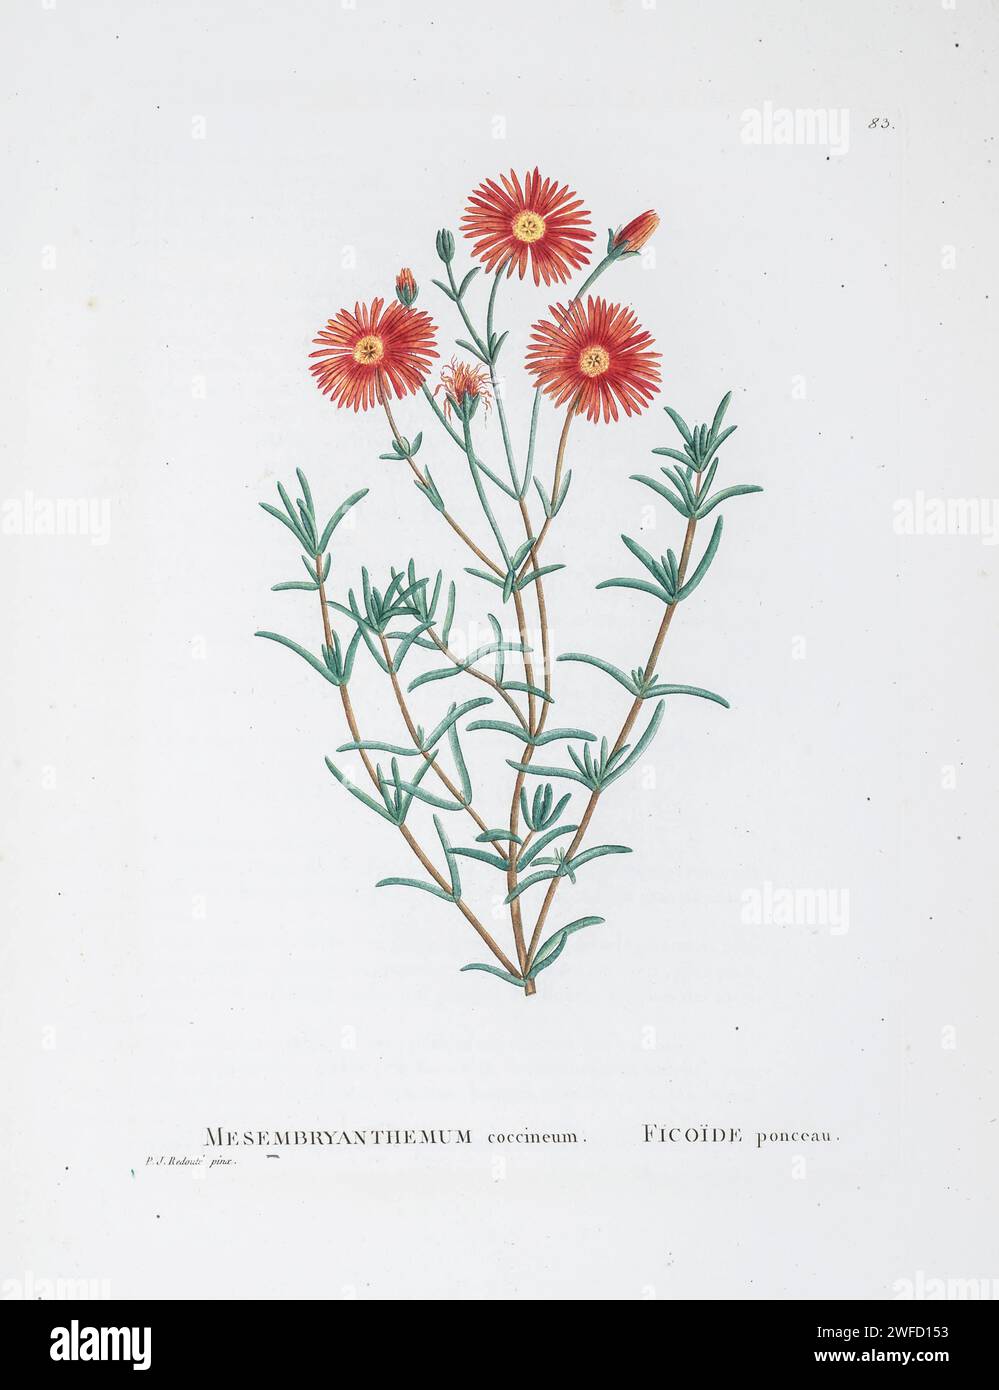 Lampranthus coccineus (Haw.) Here As Mesembryanthemum coccineumt from History of Succulent Plants [Plantarum historia succulentarum / Histoire des plantes grasses] painted by Pierre-Joseph Redouté and described by Augustin Pyramus de Candolle 1799 Lampranthus is a genus of succulent plants in the family Aizoaceae, indigenous to southern Africa. Stock Photo